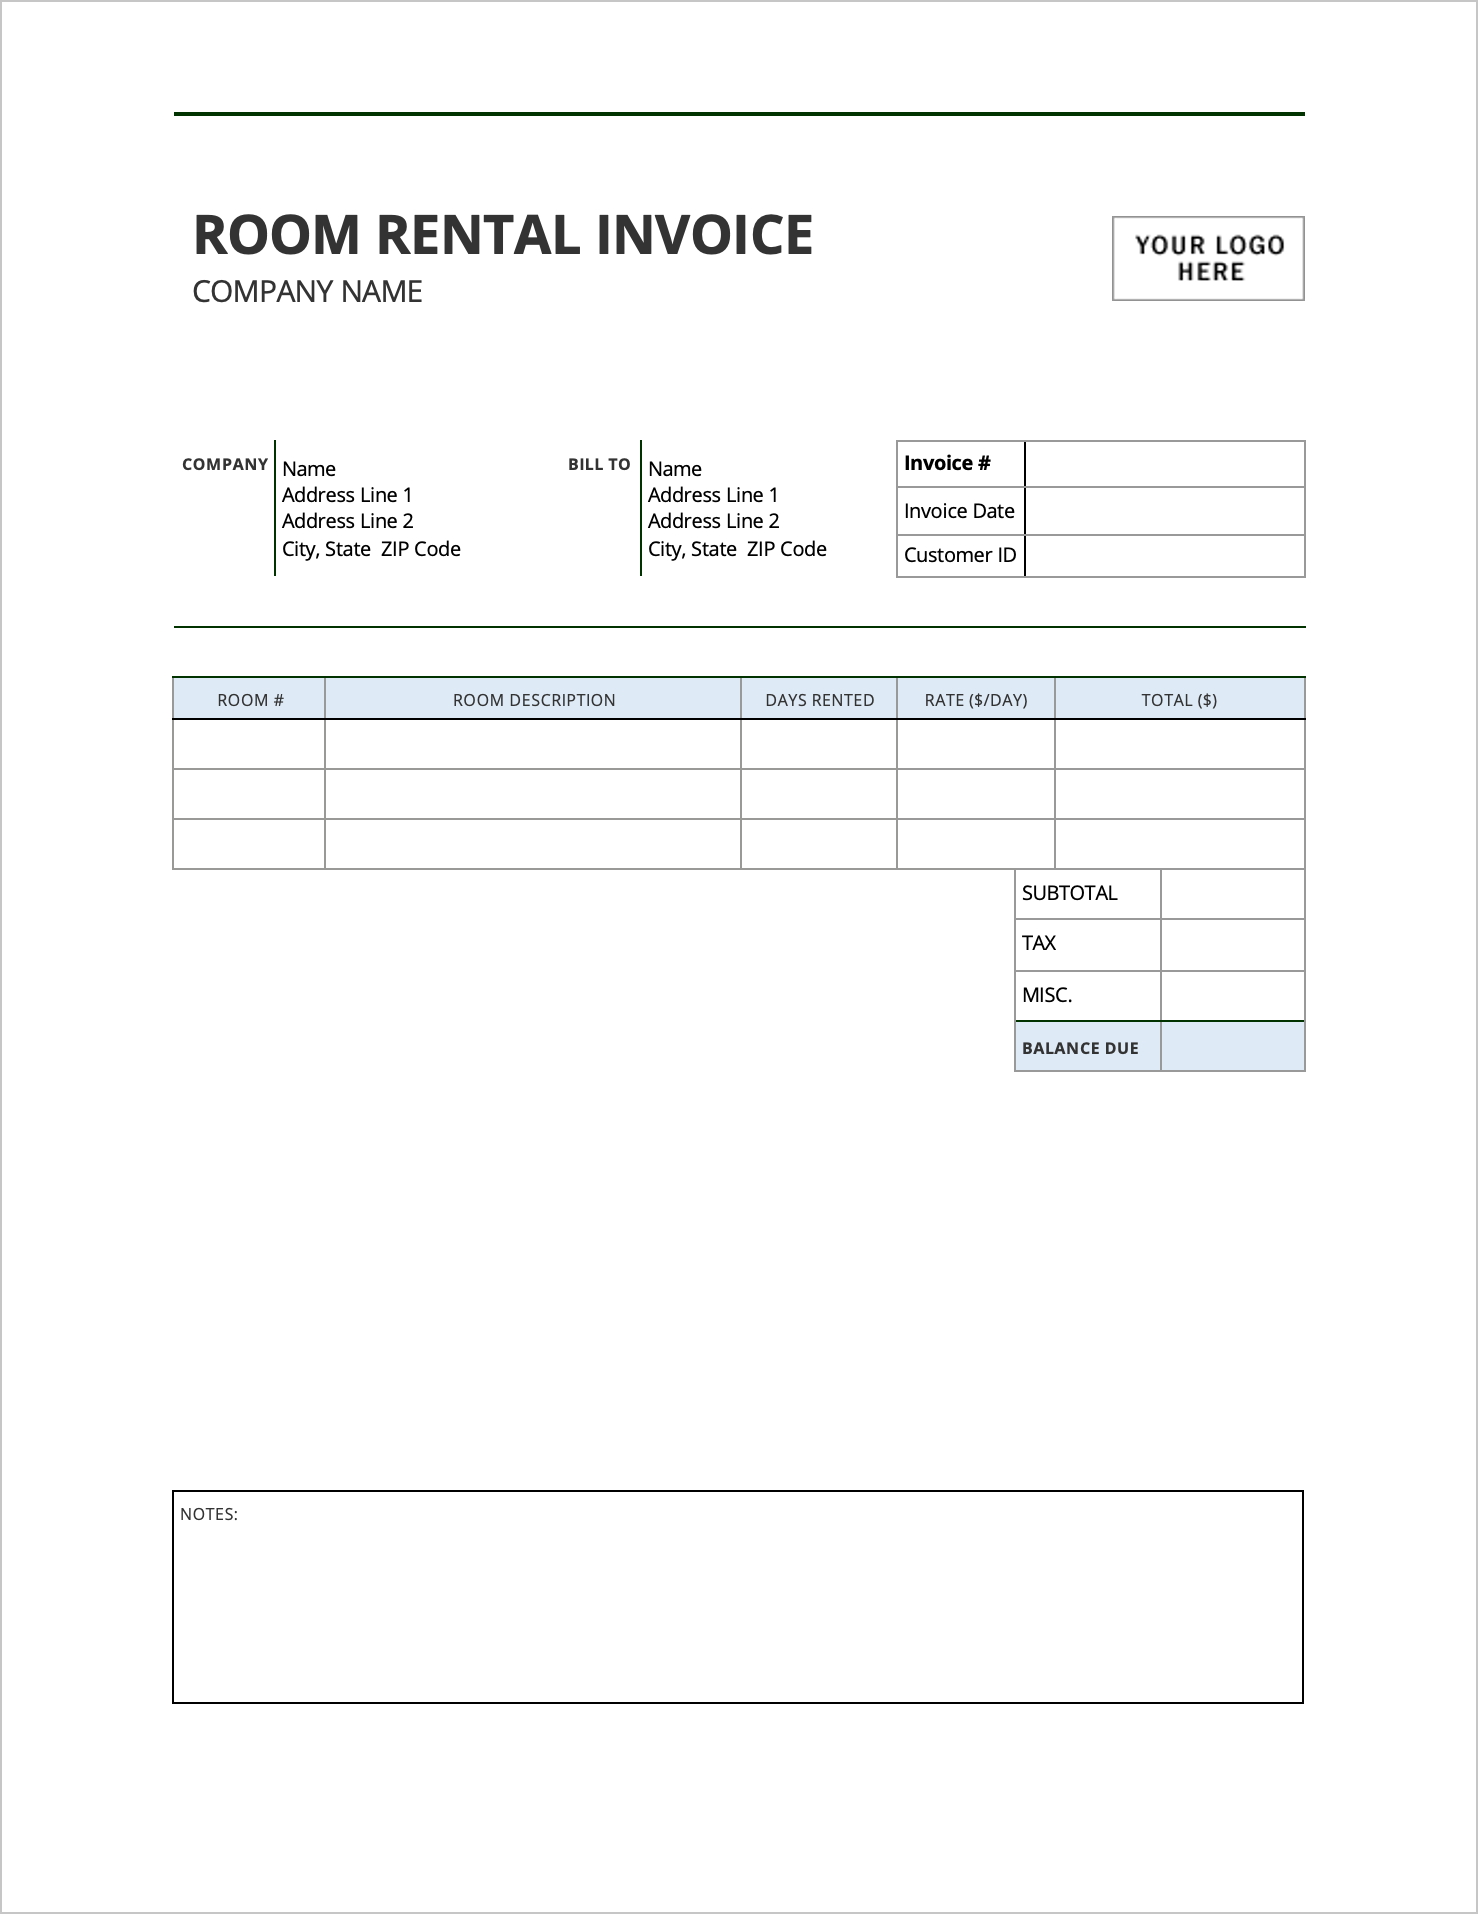 Free Room Rental Invoice Template  PDF  WORD Within Monthly Rent Invoice Template